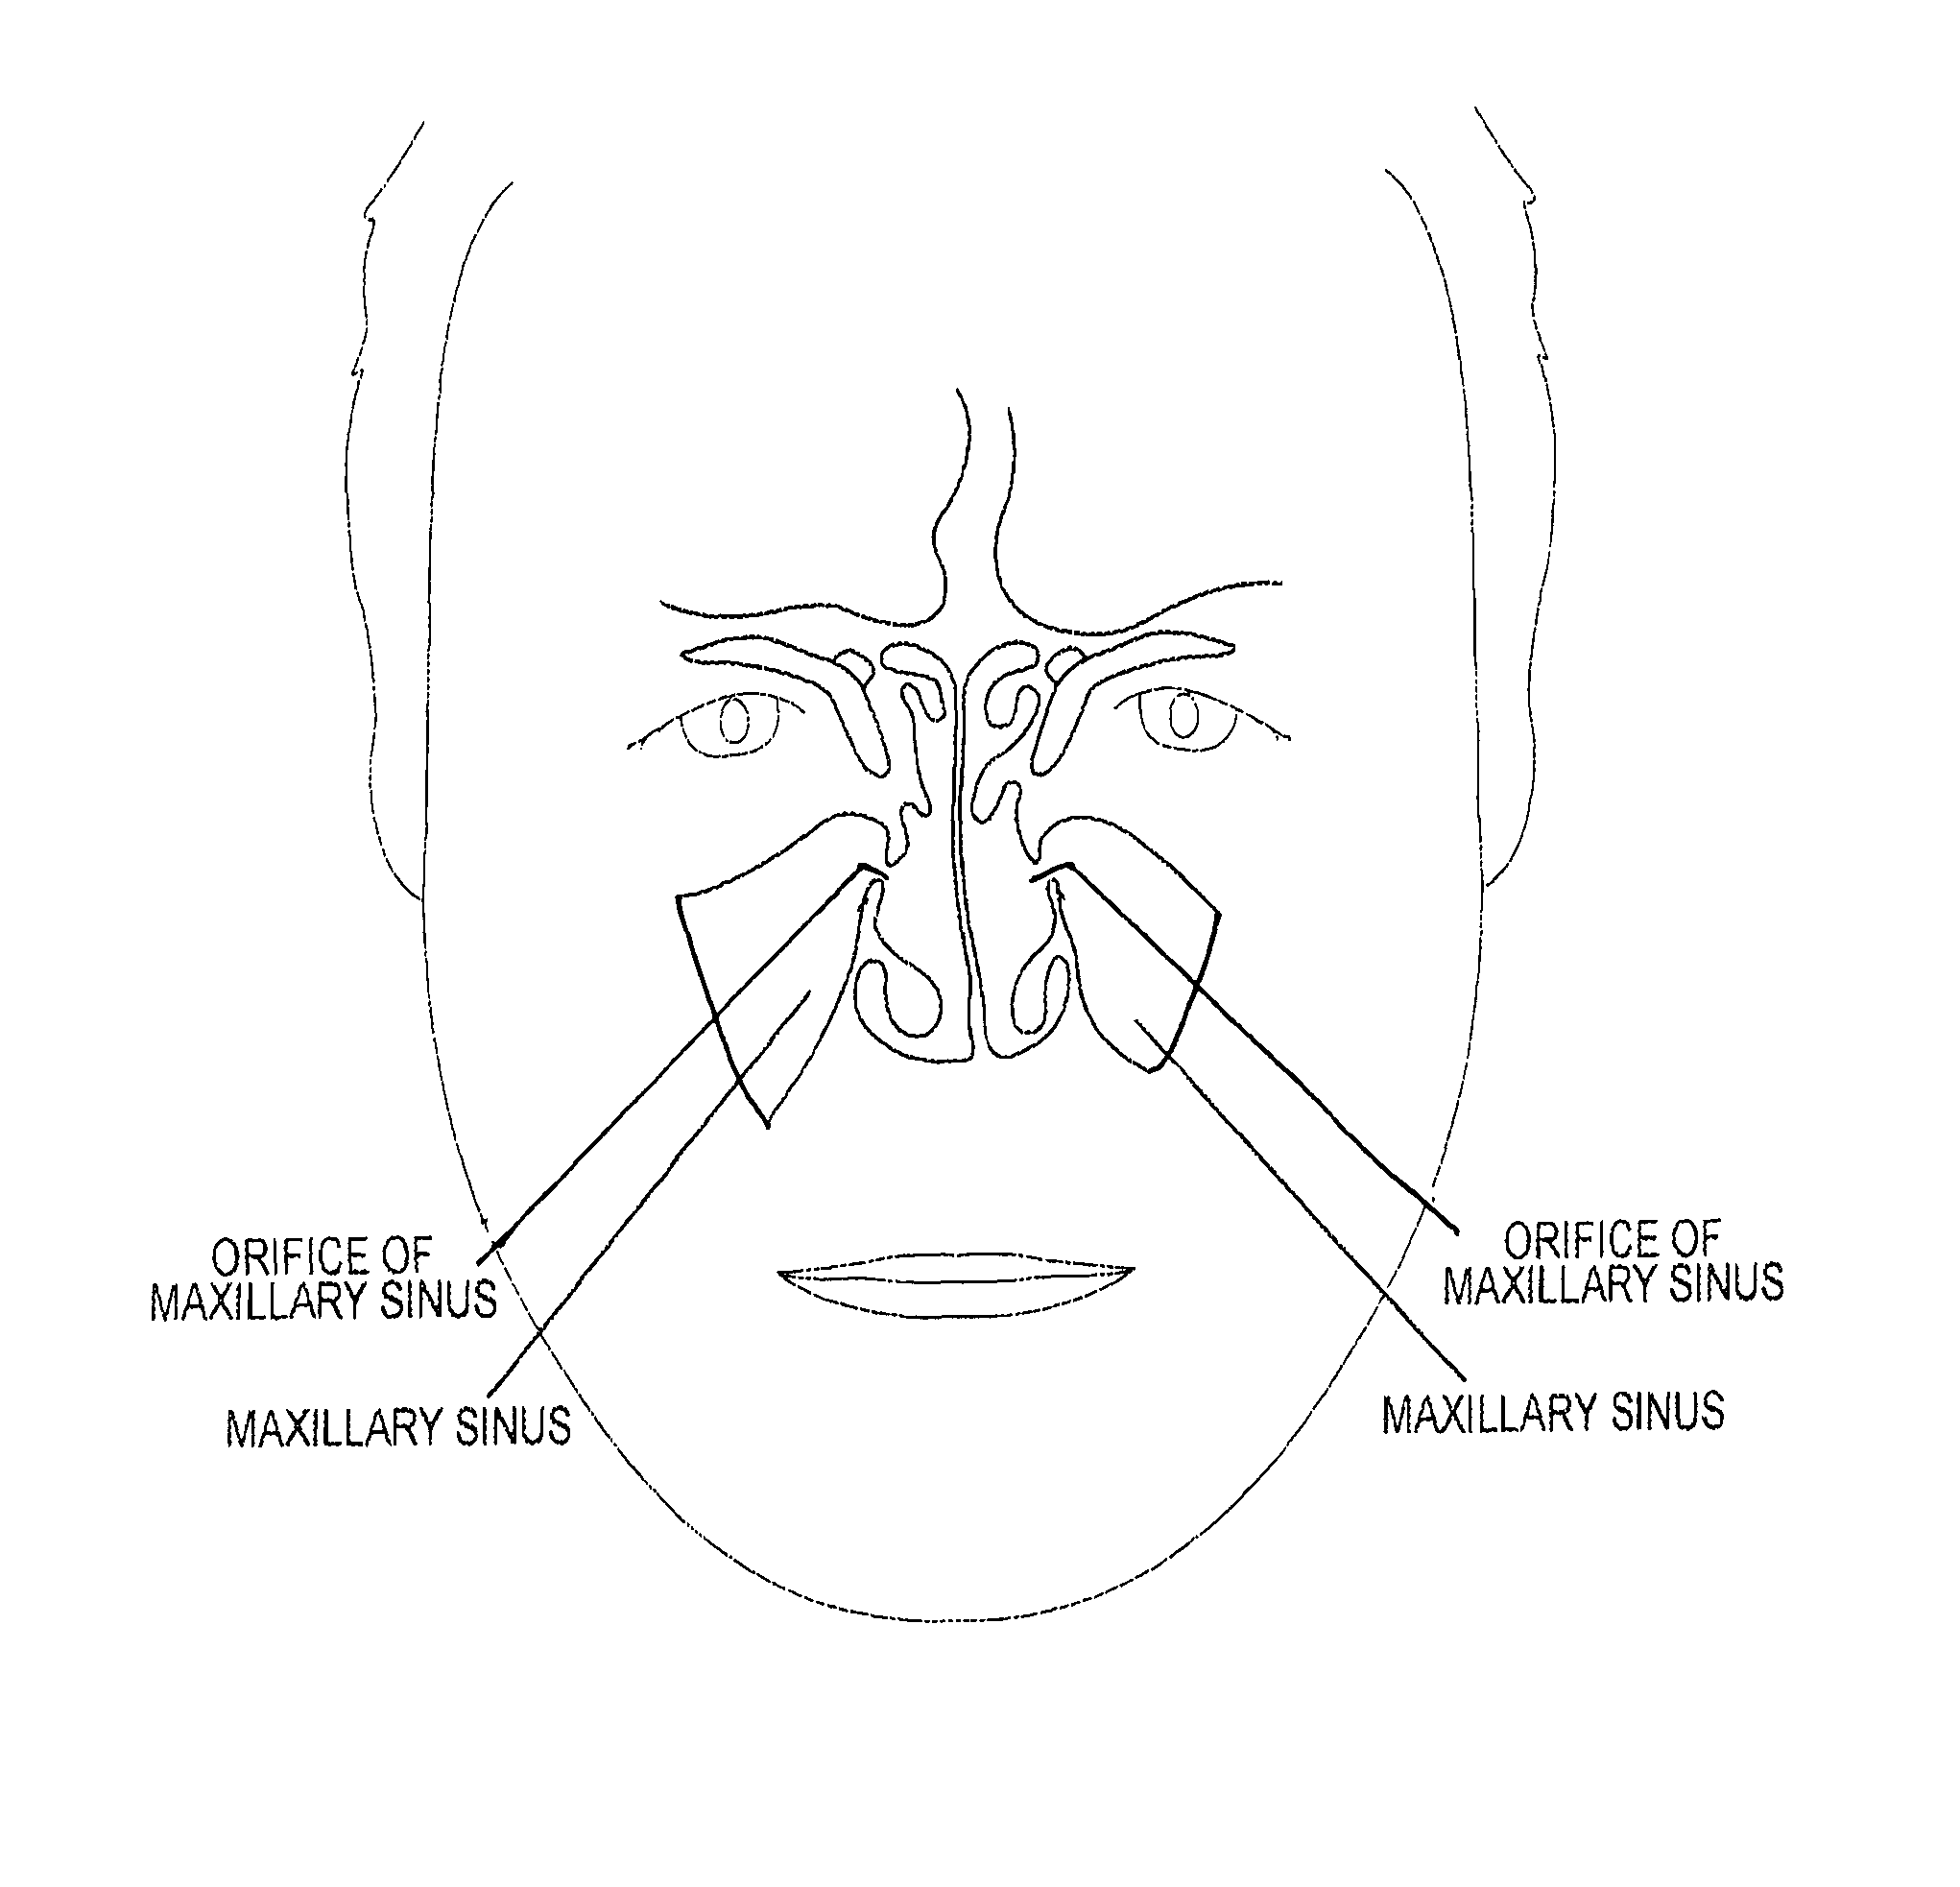 Device and method for delivering therapeutic substances to the maxillary sinus of a patient